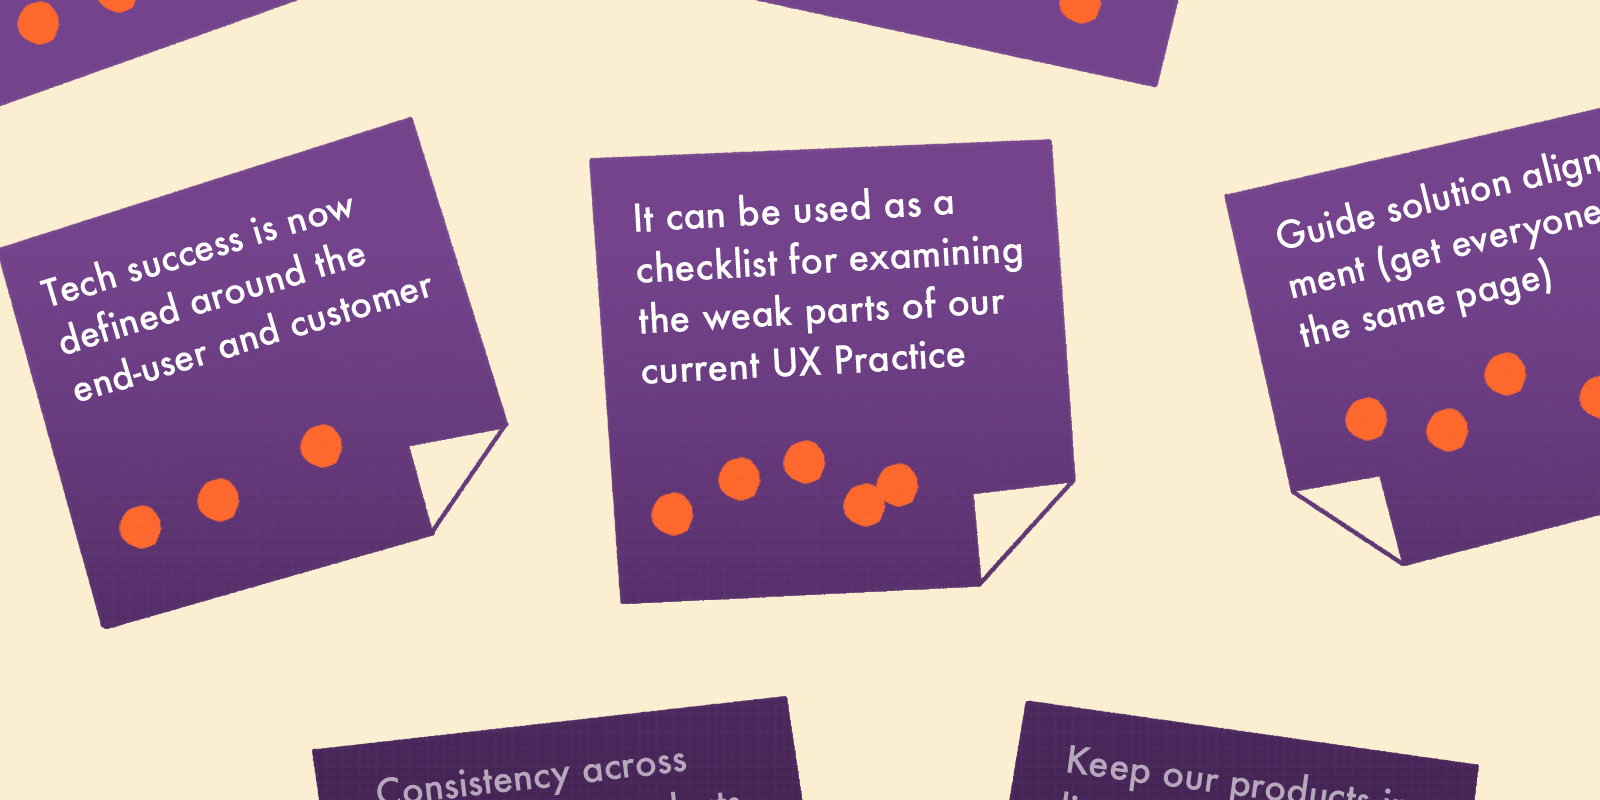 Find your UX quality benchmark